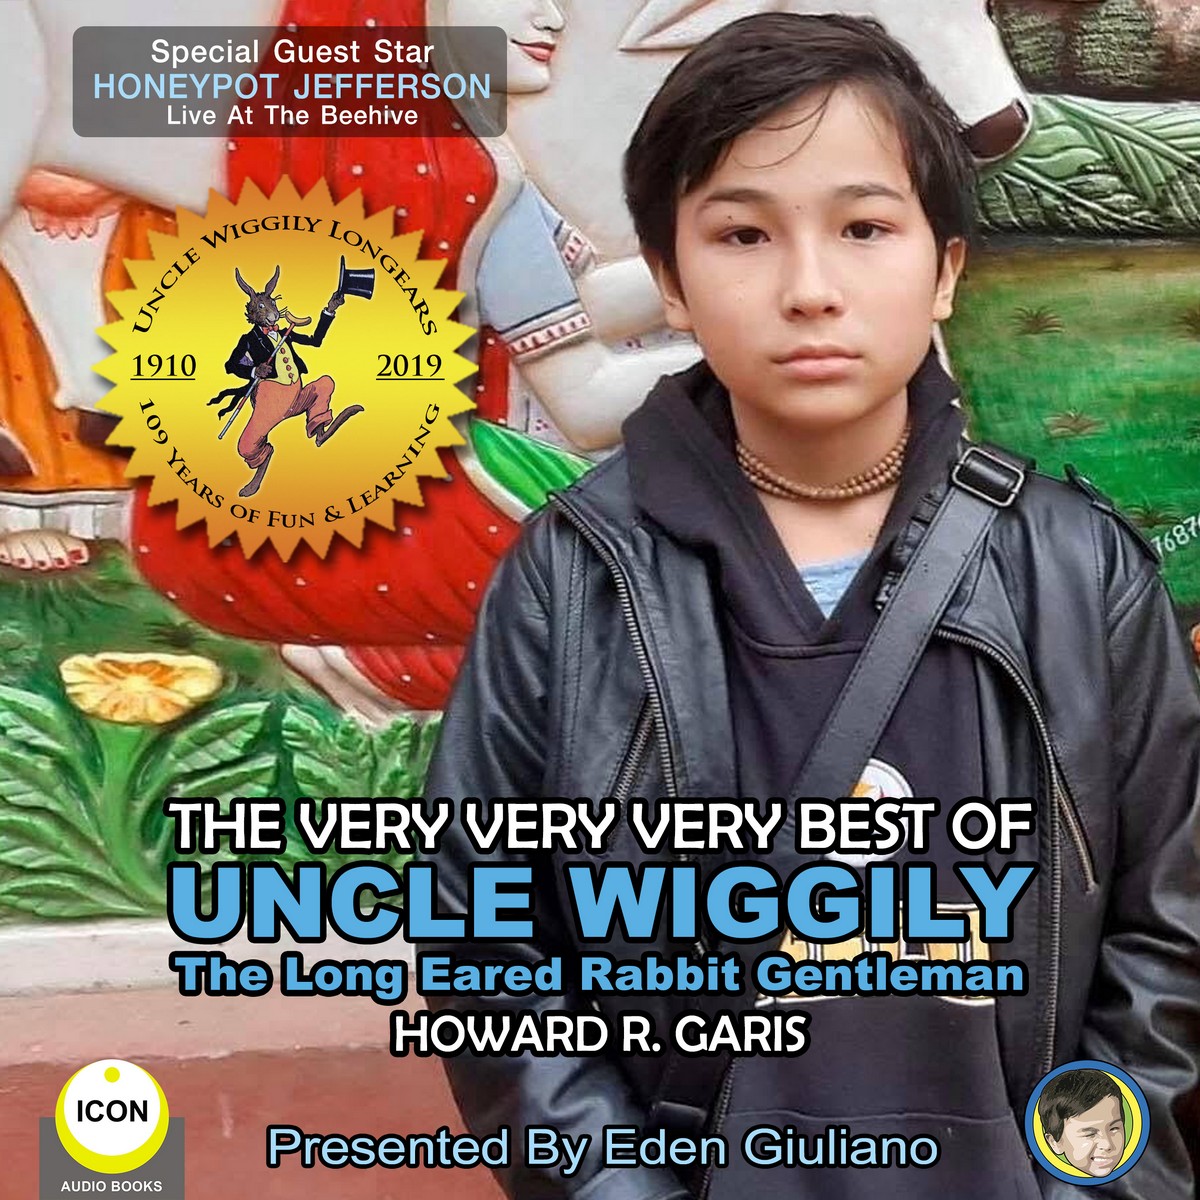 The Very Very Very Best Of Uncle Wiggily – The Long Eared Rabbit Gentleman